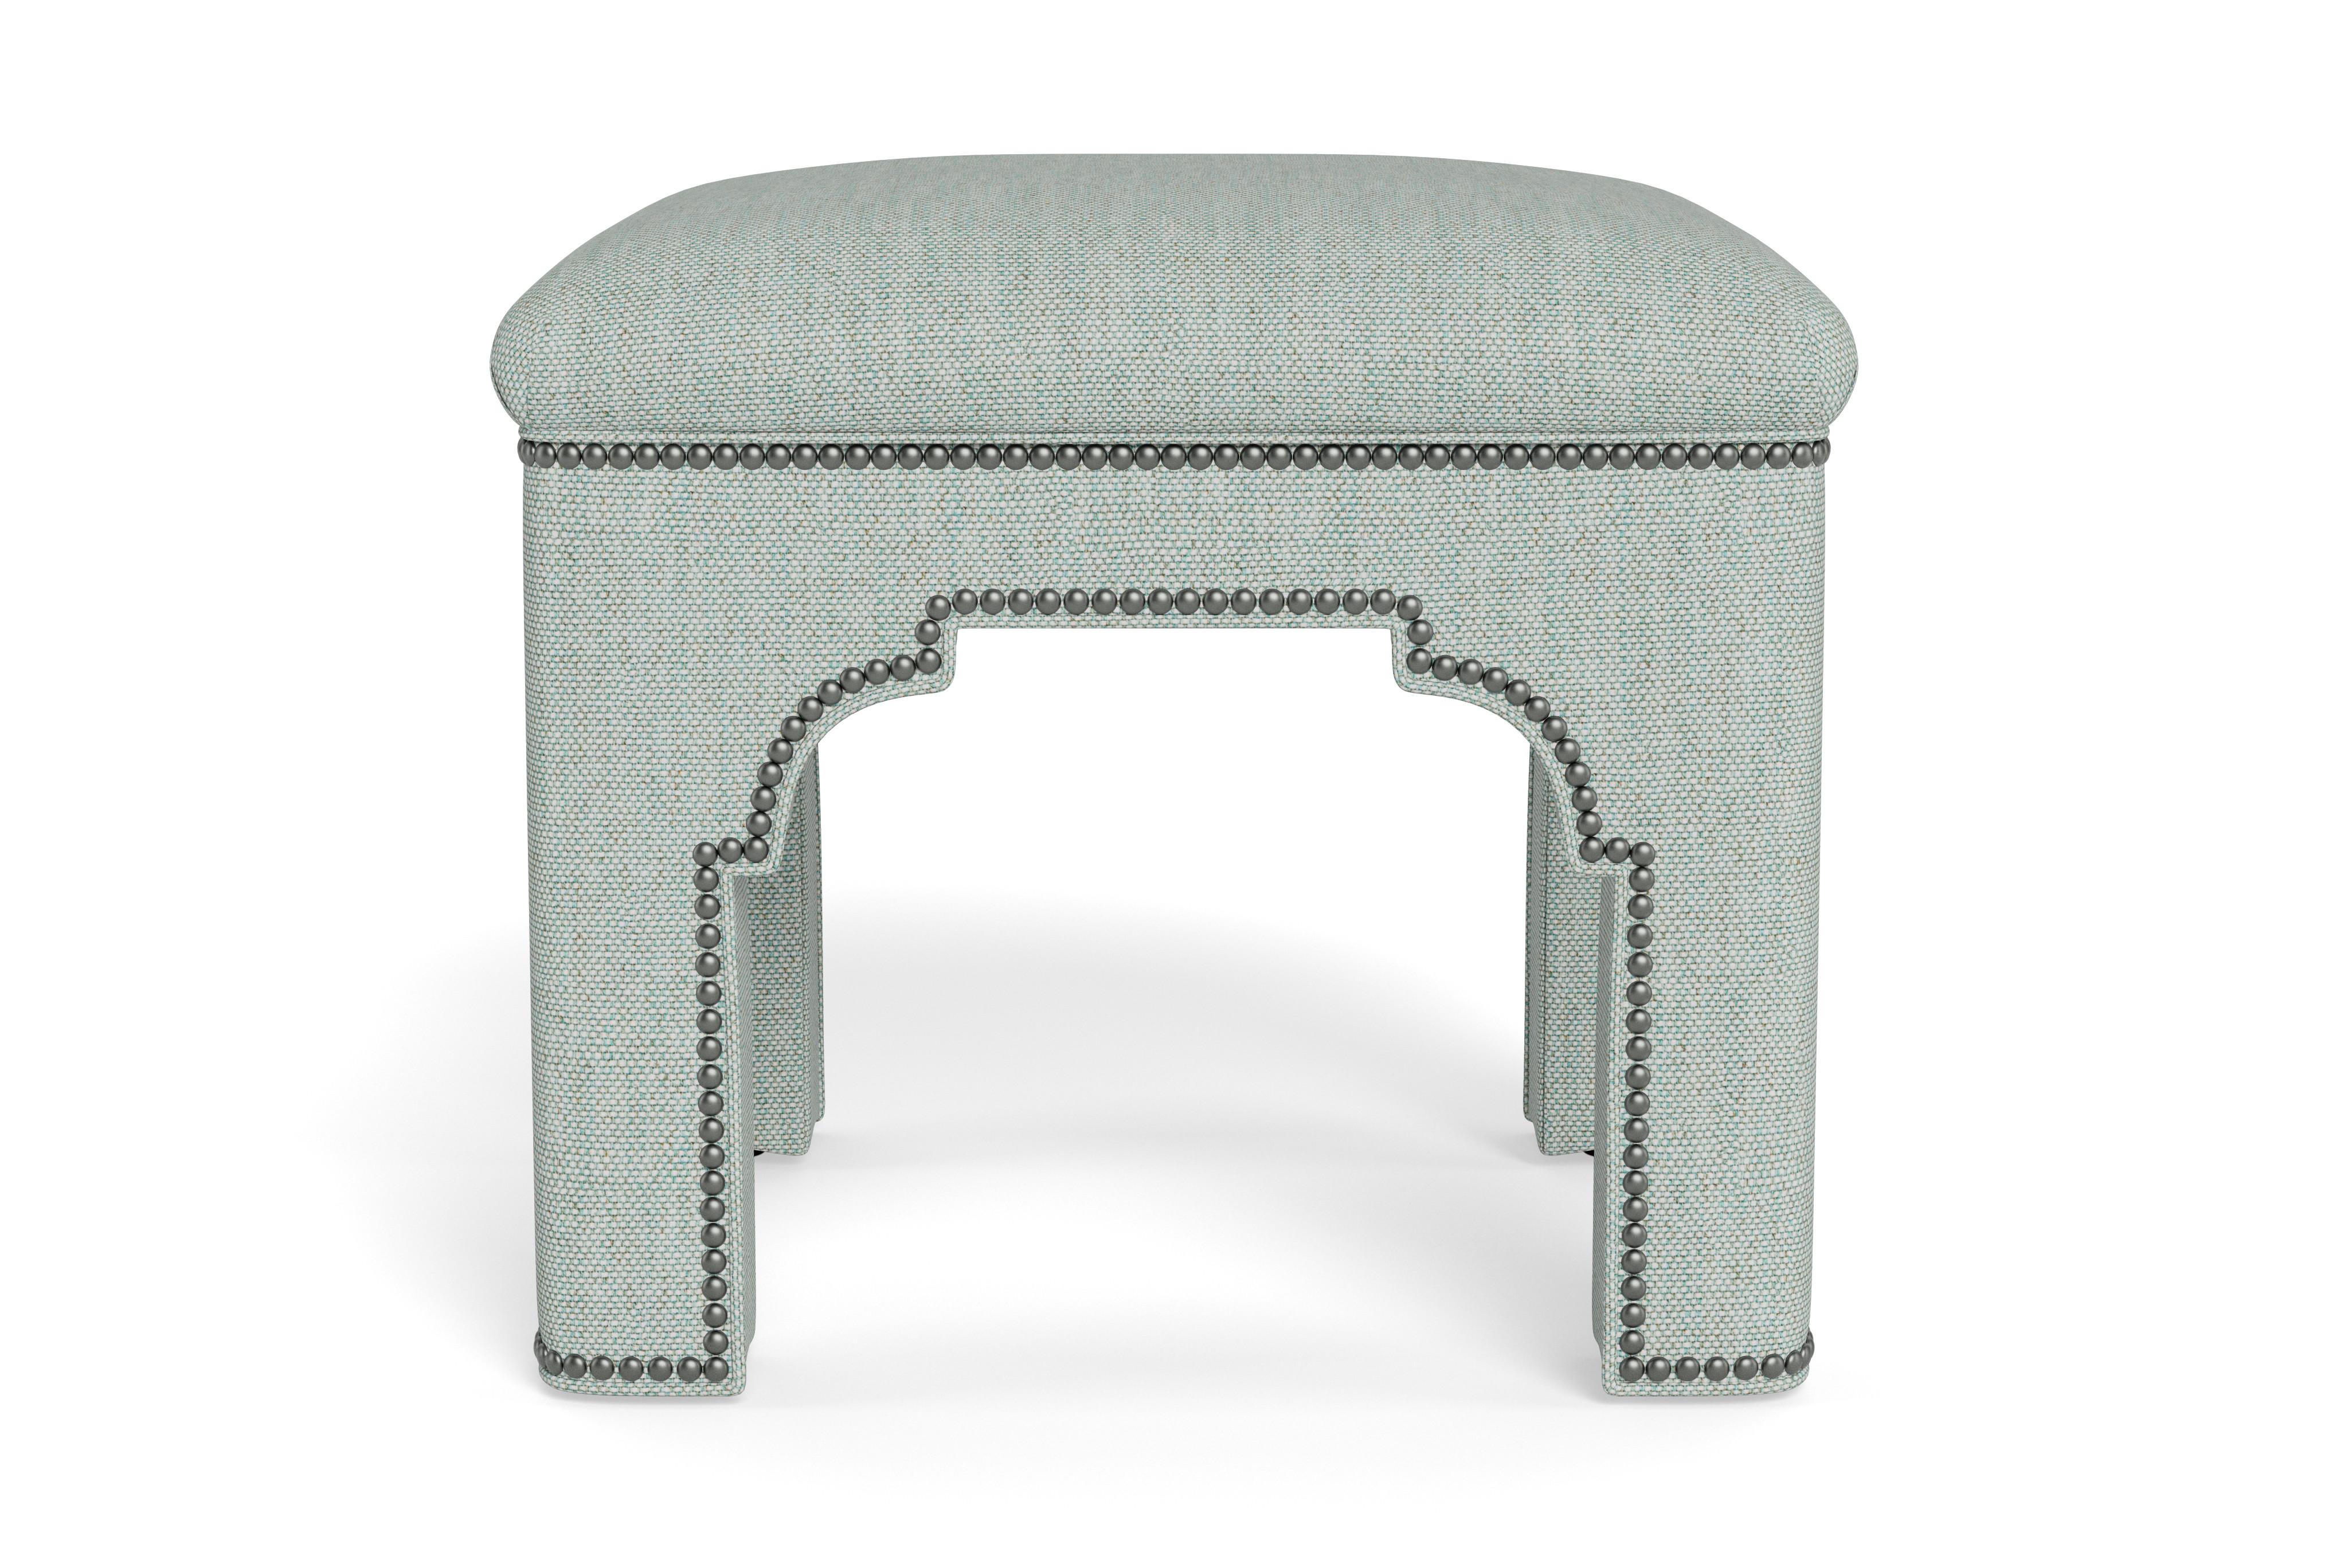 Add a chic accent to any room with this compact stool on its own or displayed in pairs.  Made to order with bronze nail heads accenting seafoam performance linen, a fabric that can be cleaned and withstand high traffic areas. The tightly upholstered